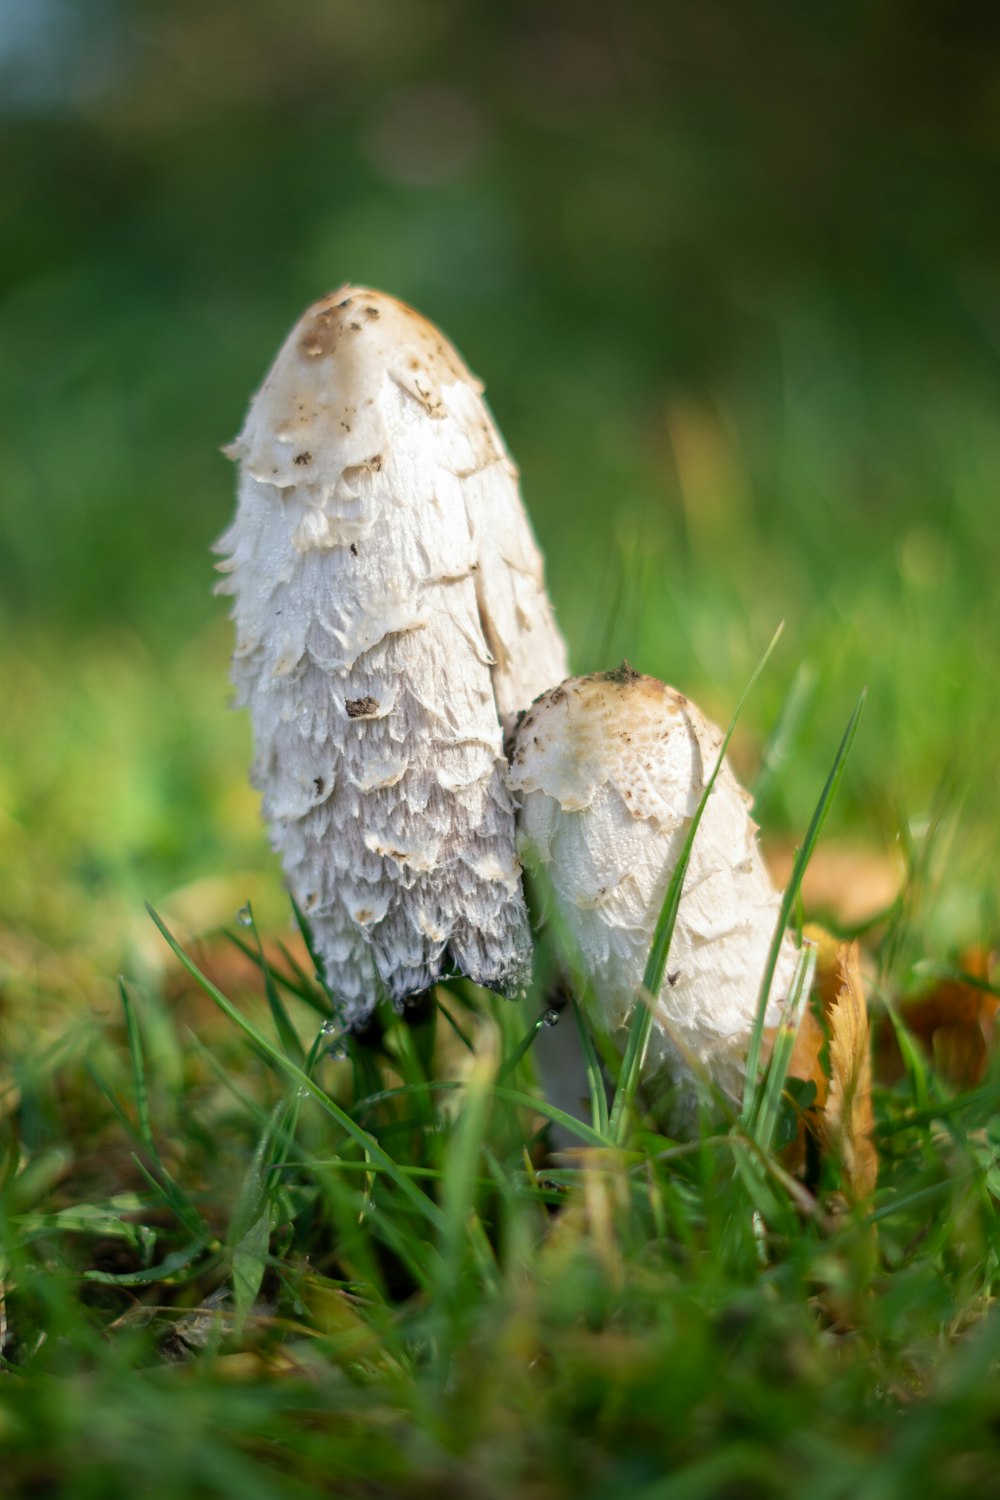 white and brown mushroom on green grass during daytime